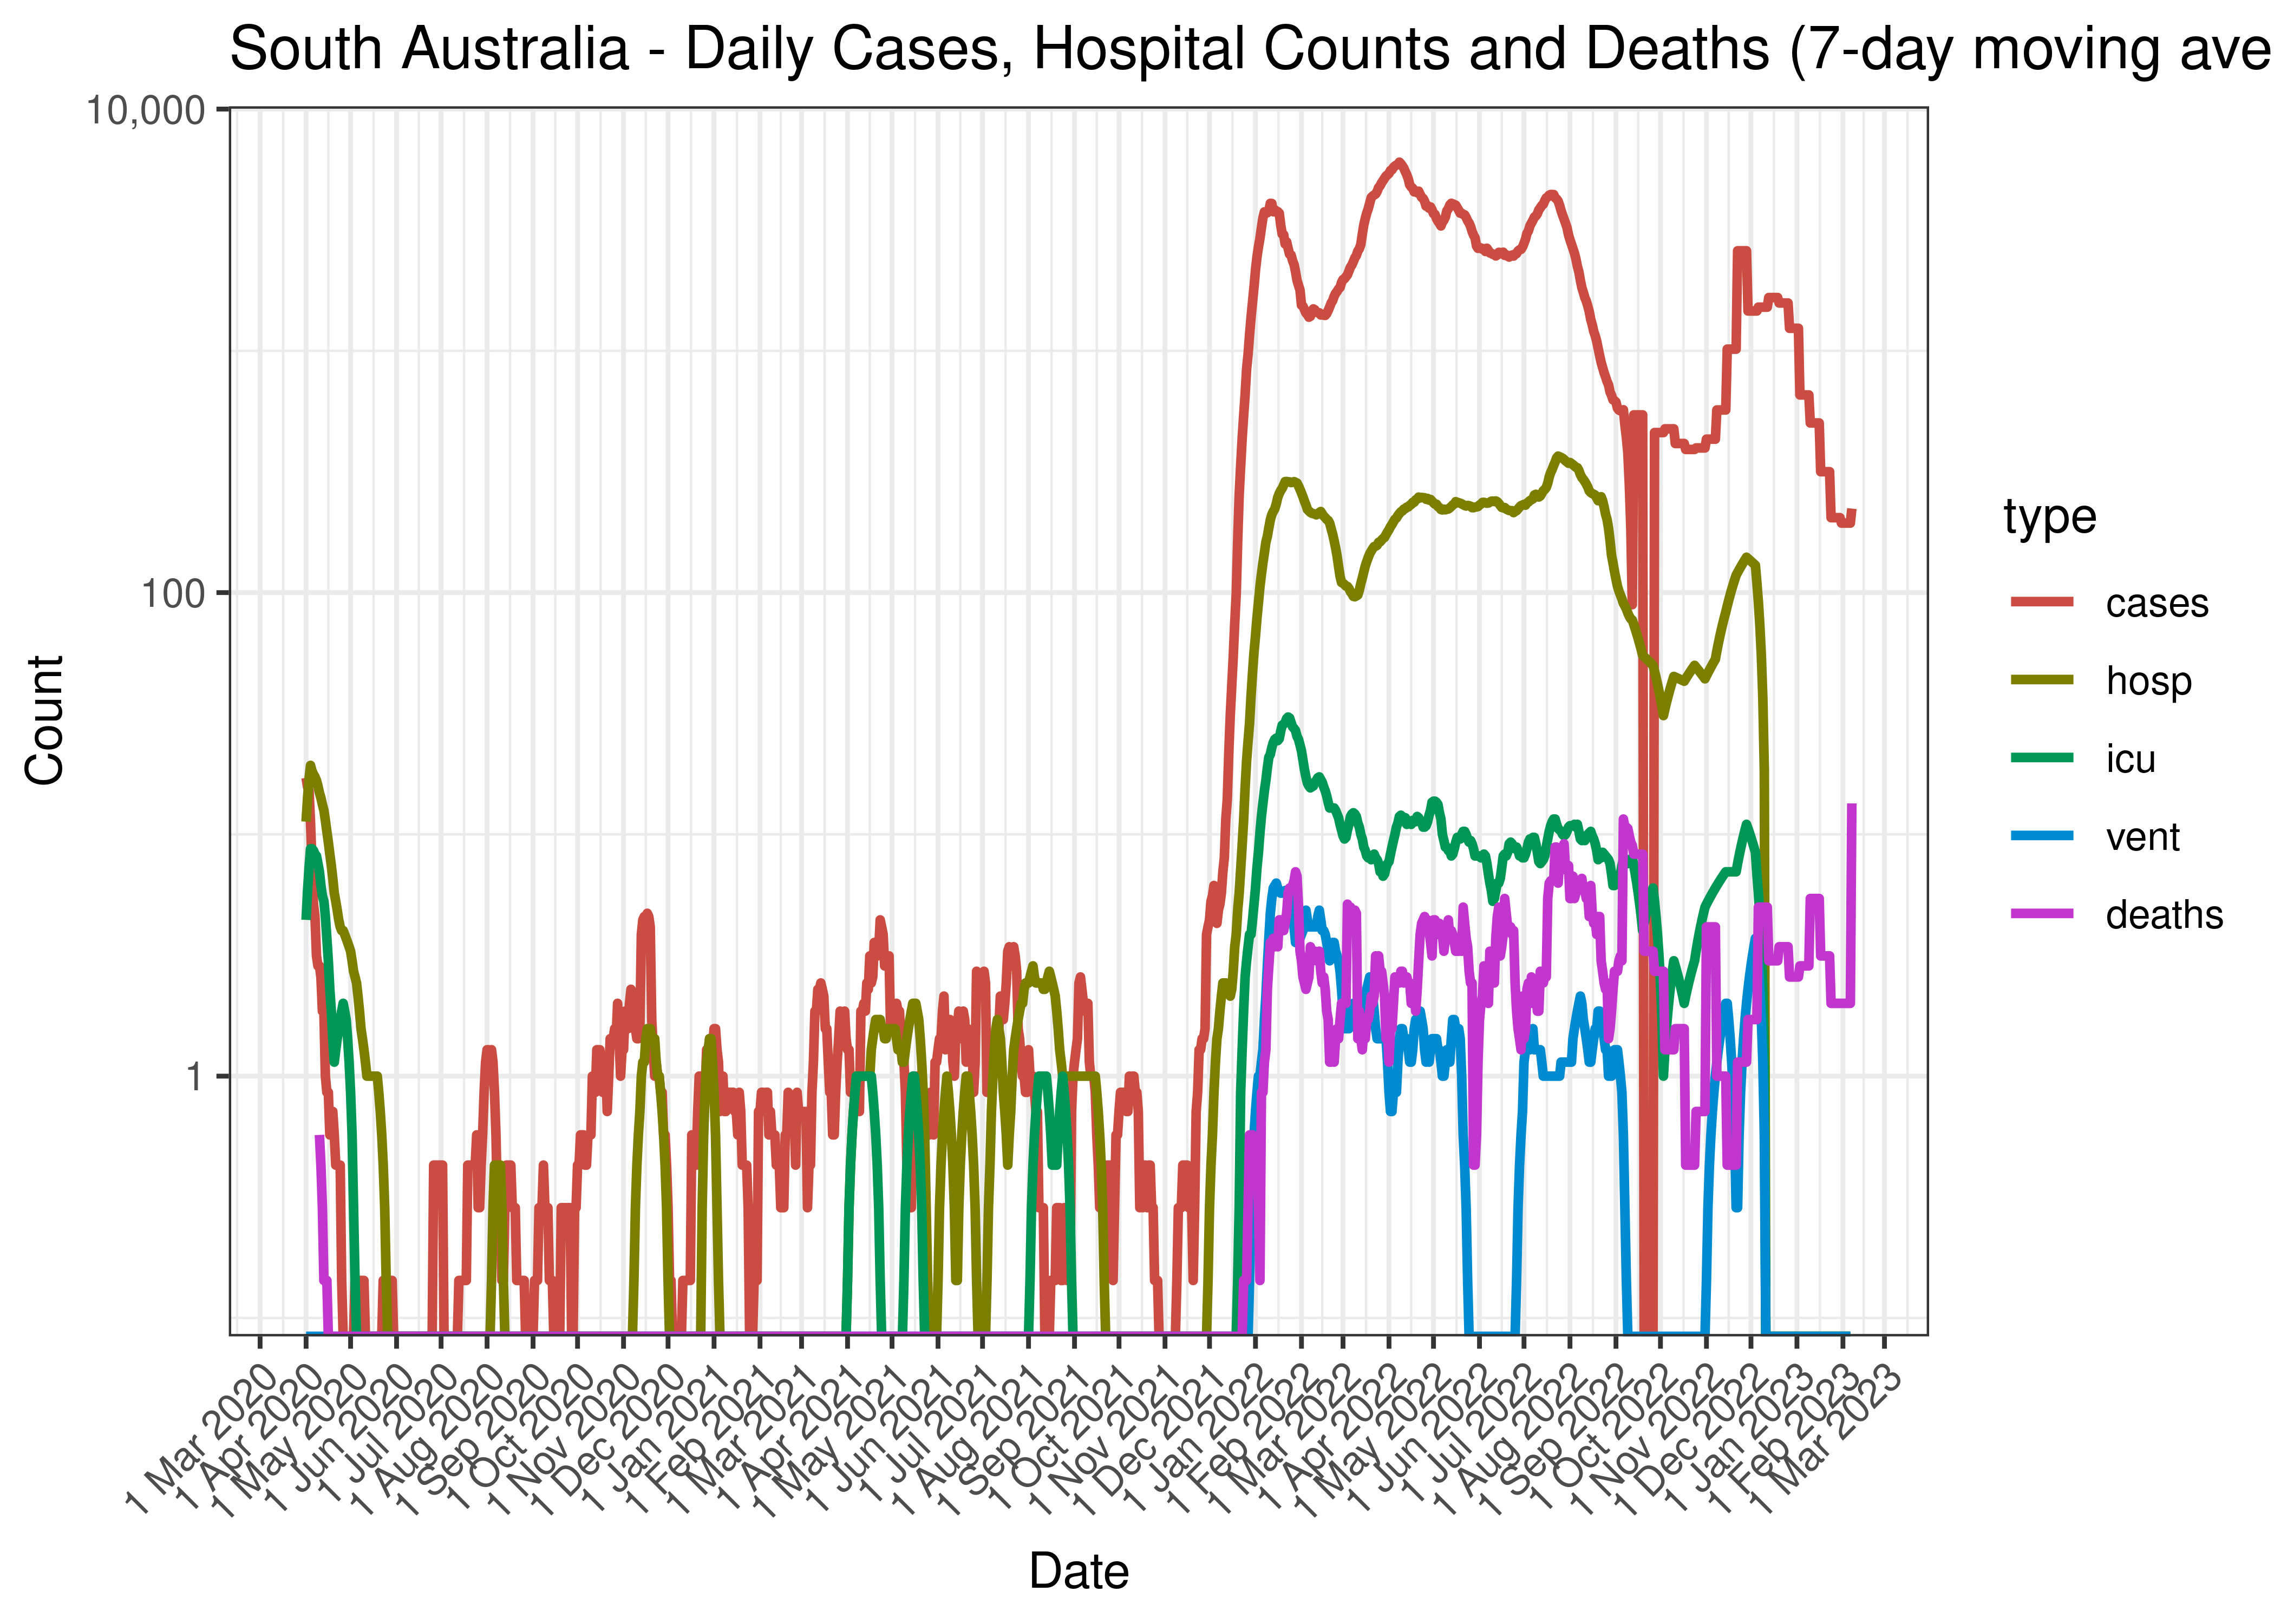 South Australia - Daily Hospital Counts for Last 30-days (7-day moving average)